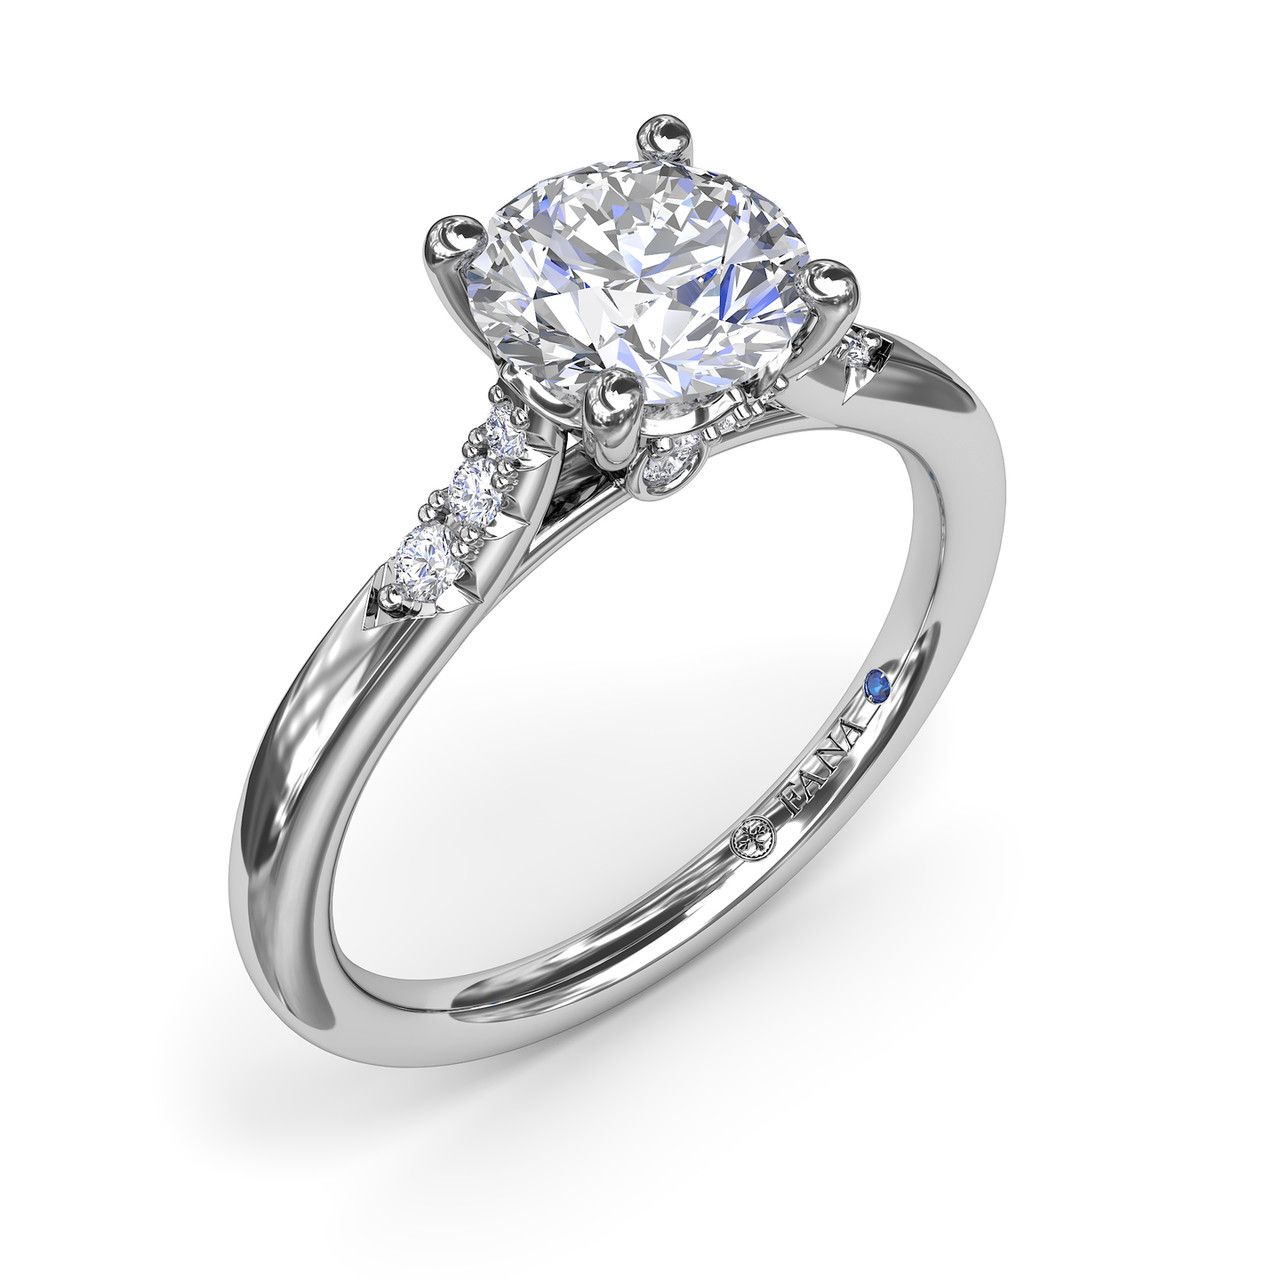 14K WHITE GOLD SEMI-MOUNT RING SIZE 6.5 WITH 14=0.16TW ROUND G-H VS2-SI1 DIAMONDS AND ONE ROUND BLUE SAPPHIRE  (2.90 GRAMS)